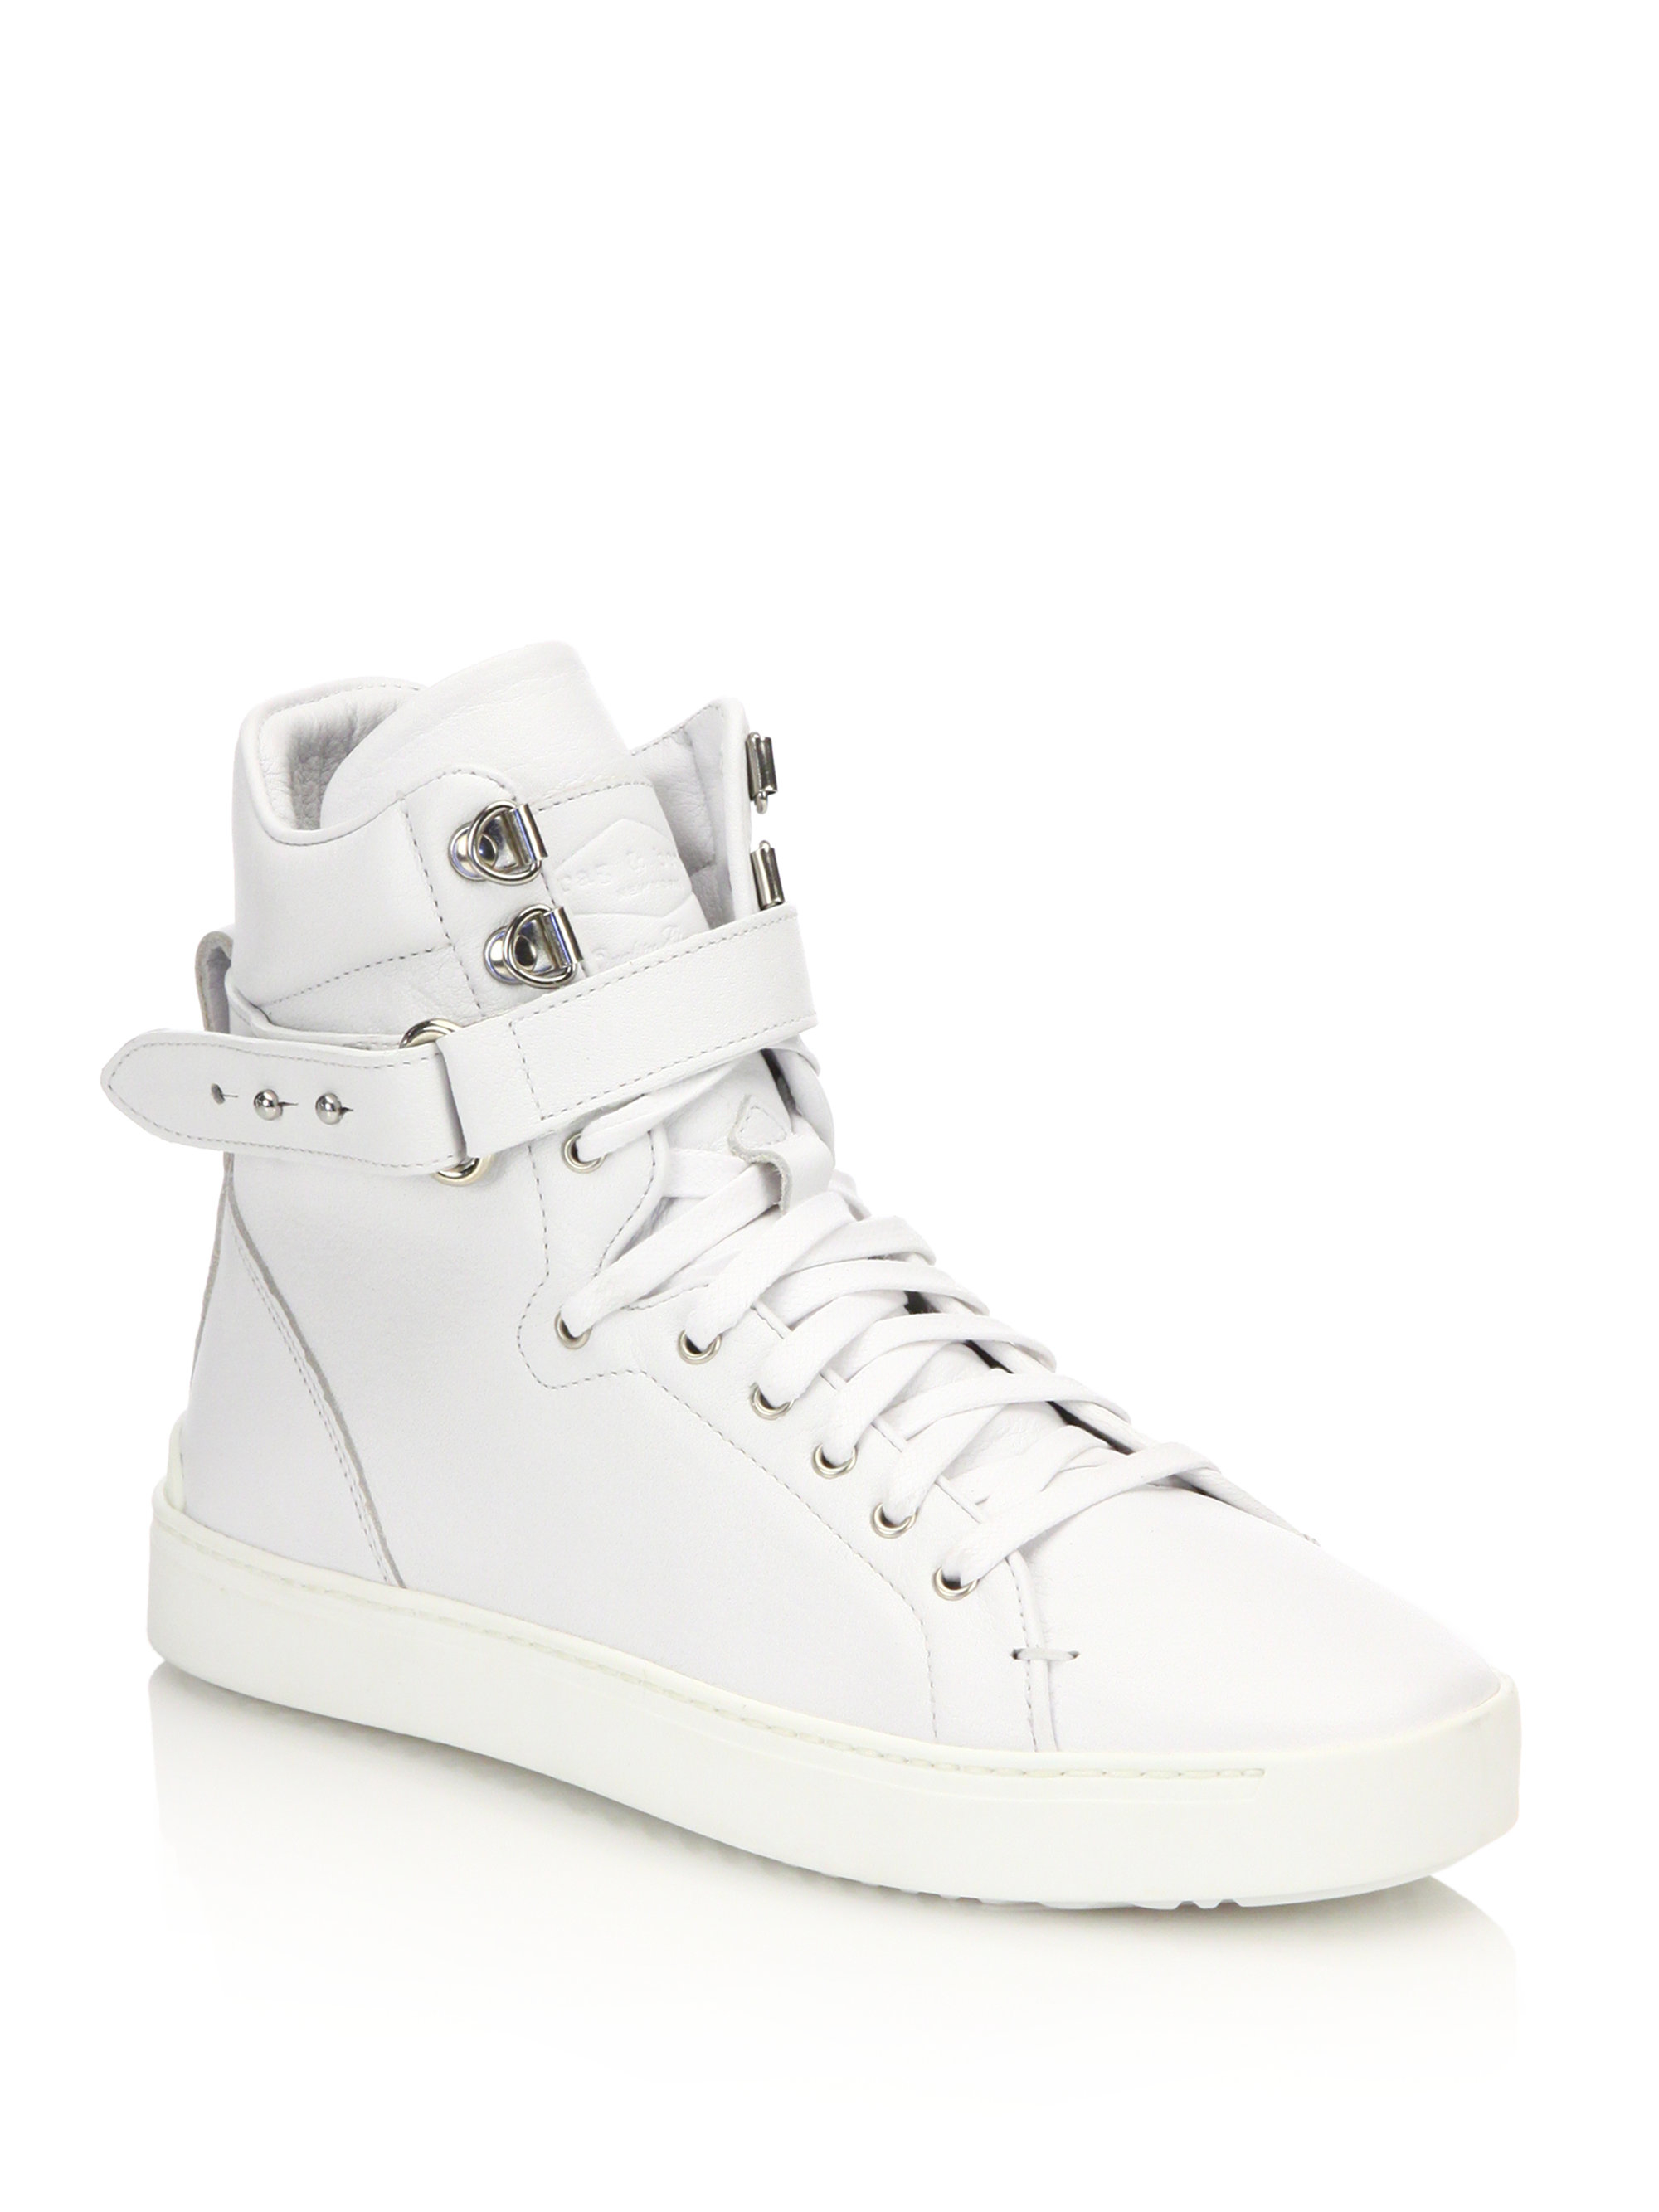 Lyst - Rag & Bone Kent Leather High-top Sneakers in White